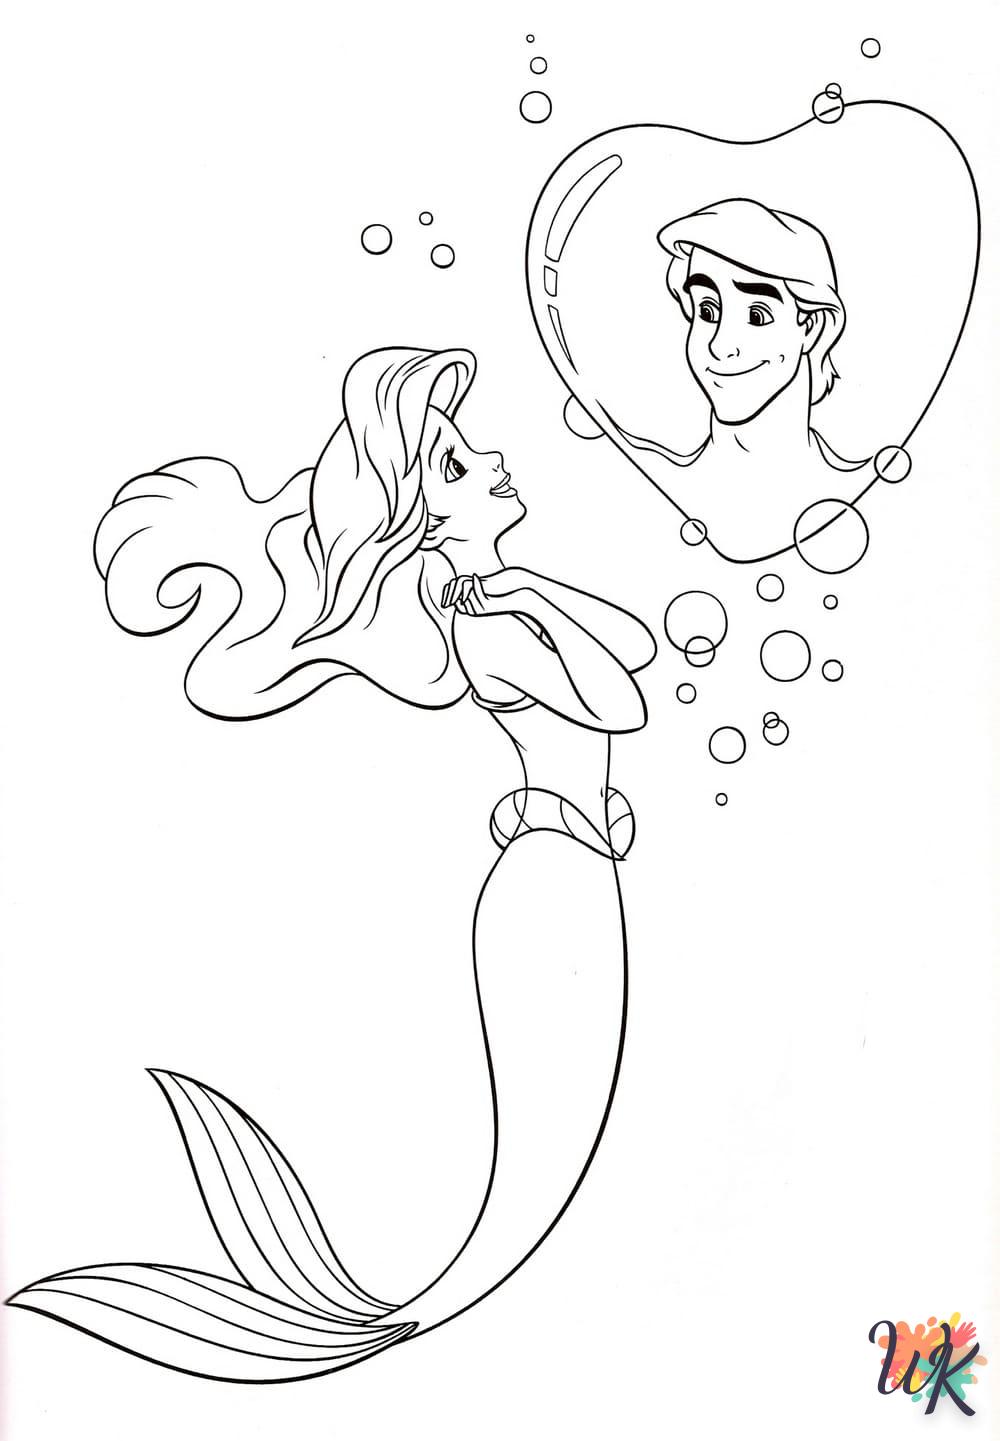 Disney coloring pages to print